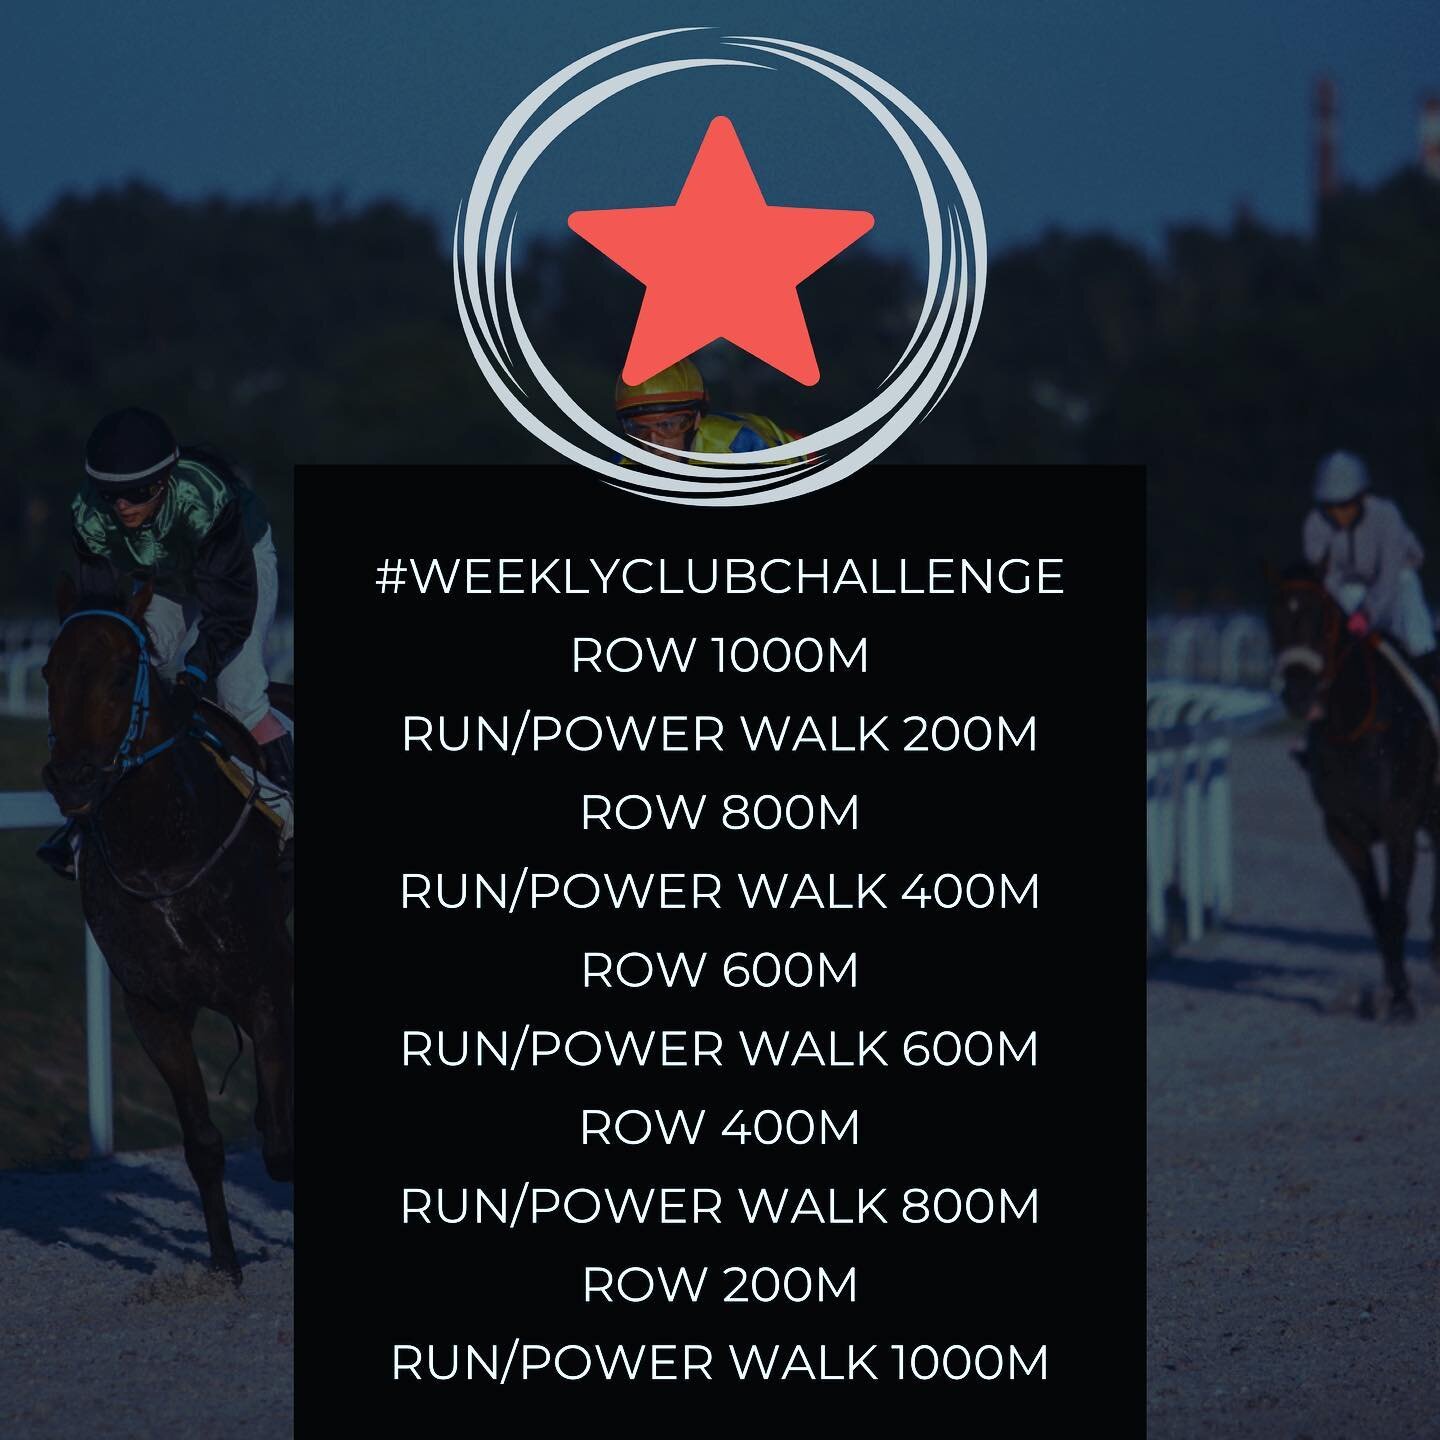 Hold your horses for this #weeklyclubchallenge! 

Establish a manageable pace for each cardio machine and keep your heart rate in a moderate place. Slow and steady will win this race!